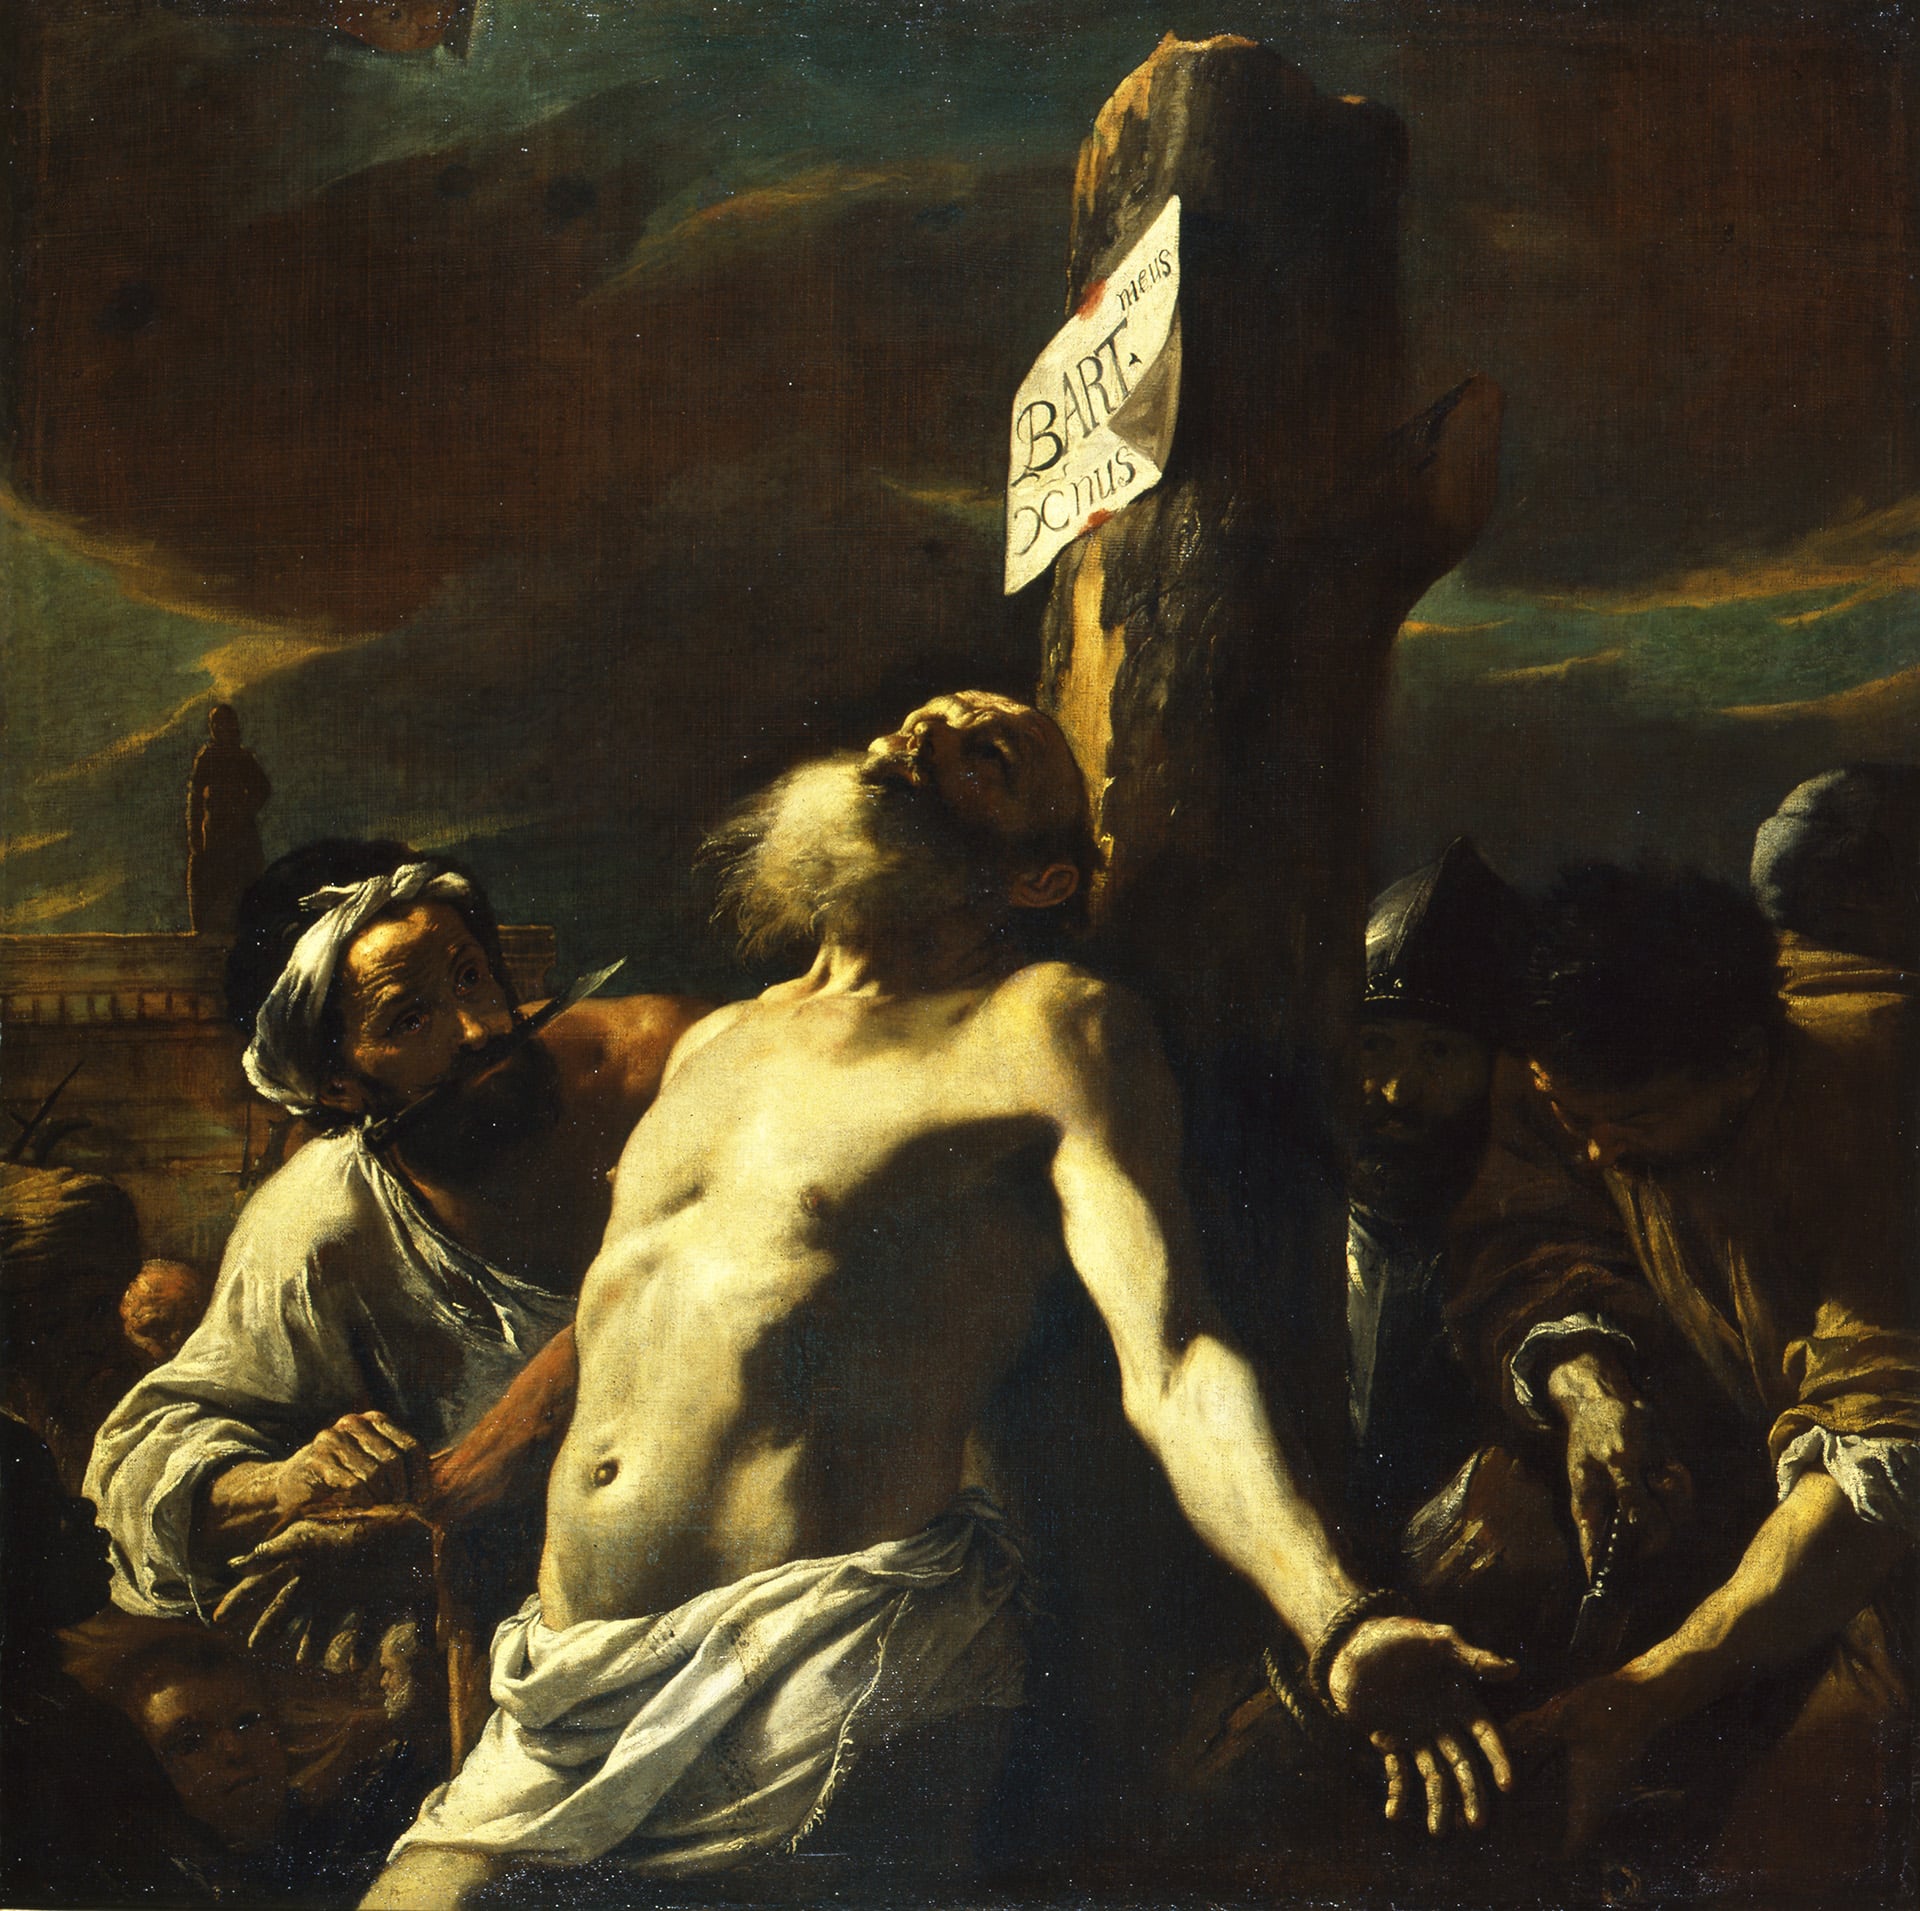 a painting with dramatic lighting of a man being flayed alive